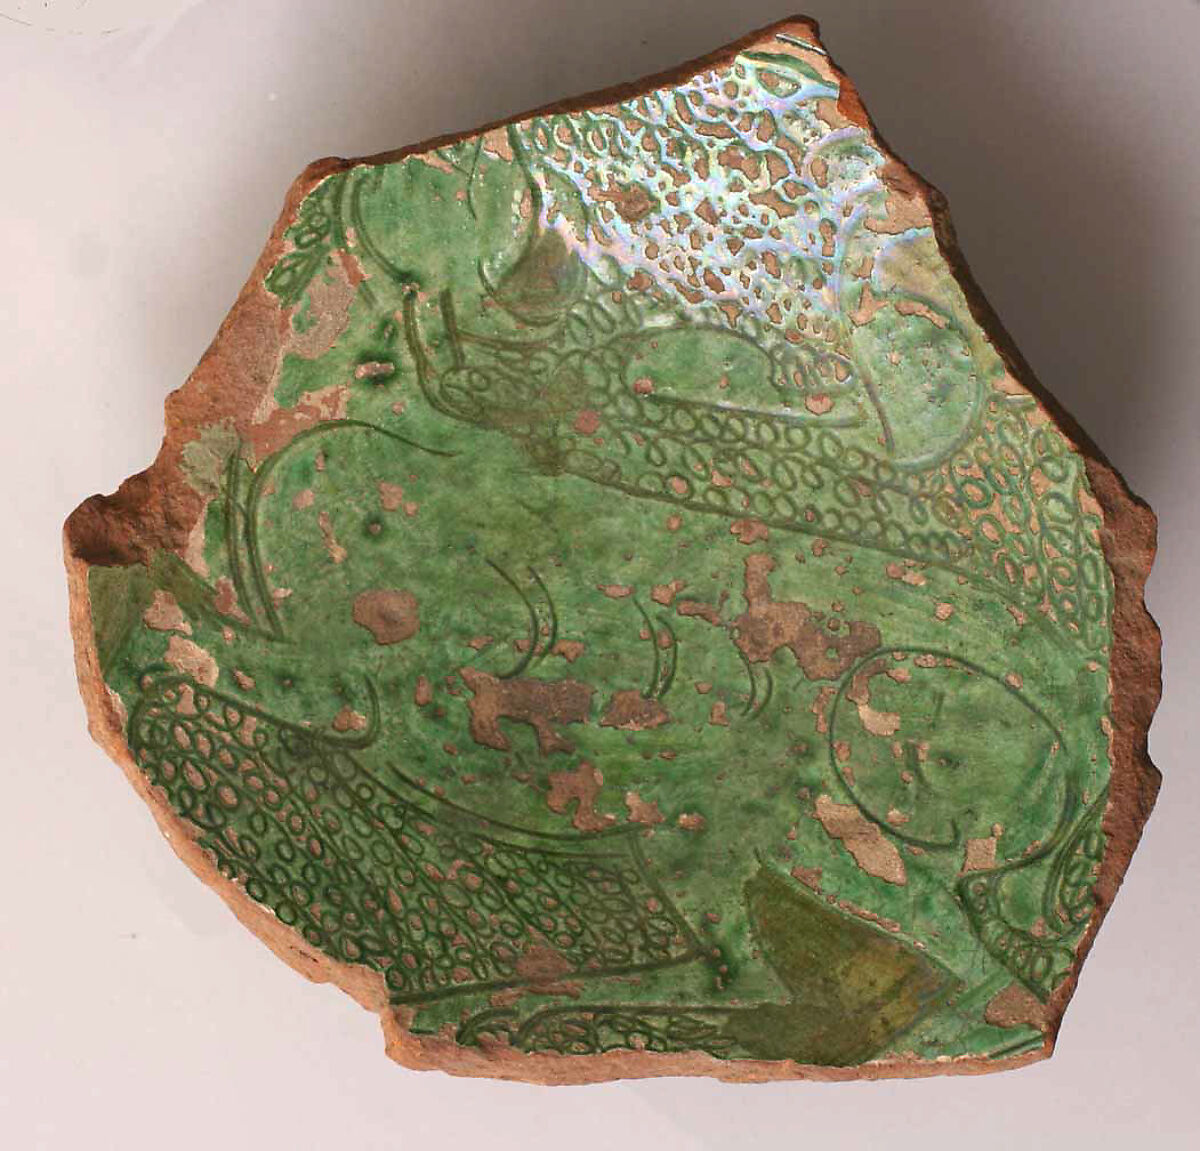 Fragment, Earthenware; incised decoration through white slip and coloring under transparent glaze. 